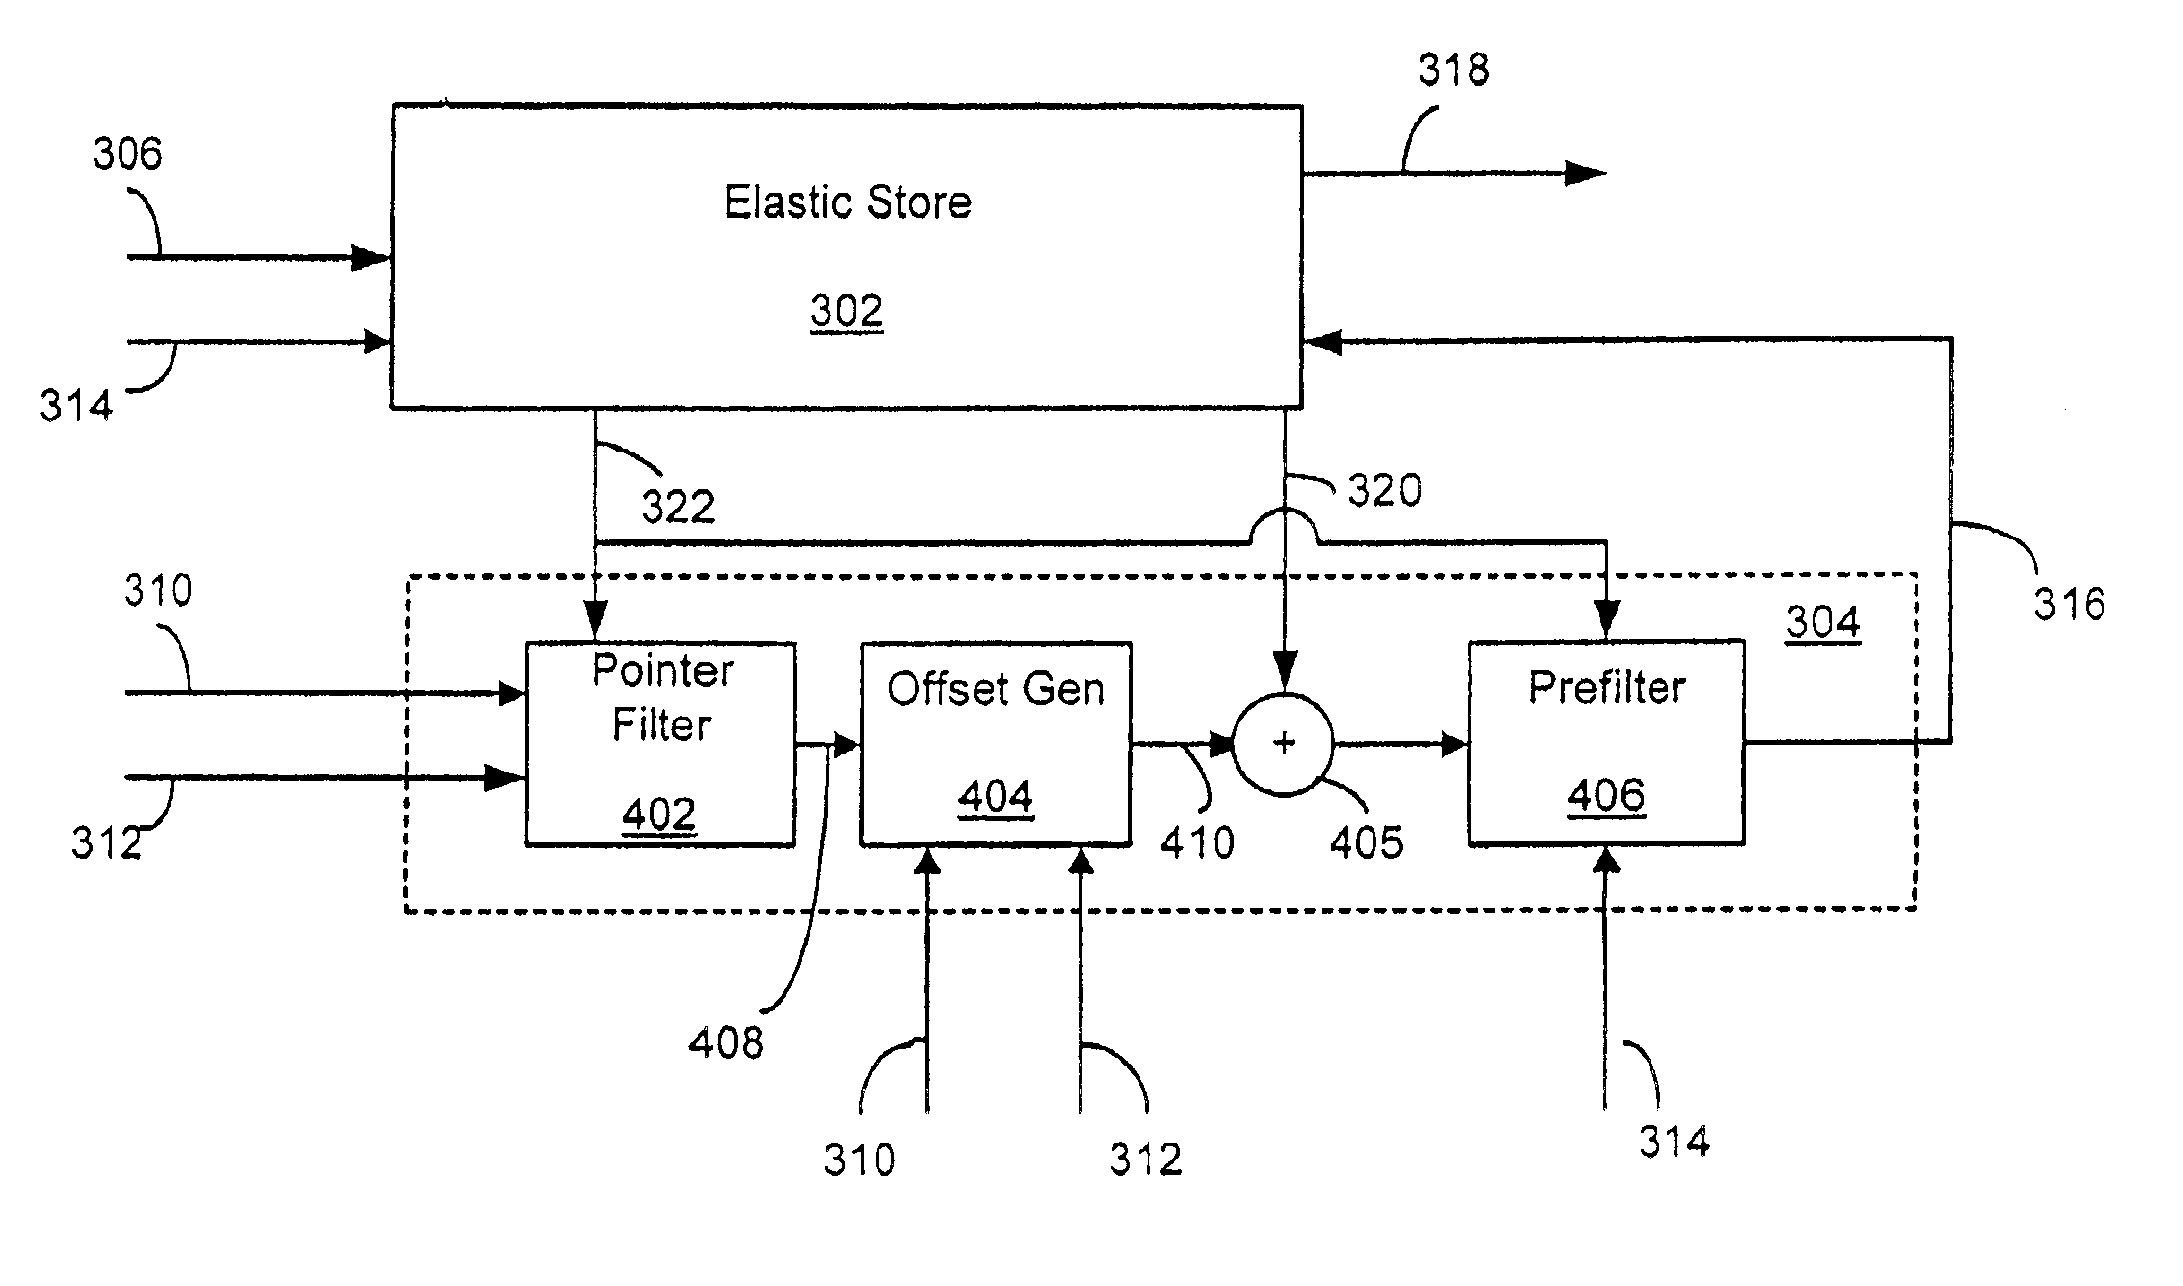 Pointer adjustment wander and jitter reduction apparatus for a desynchronizer